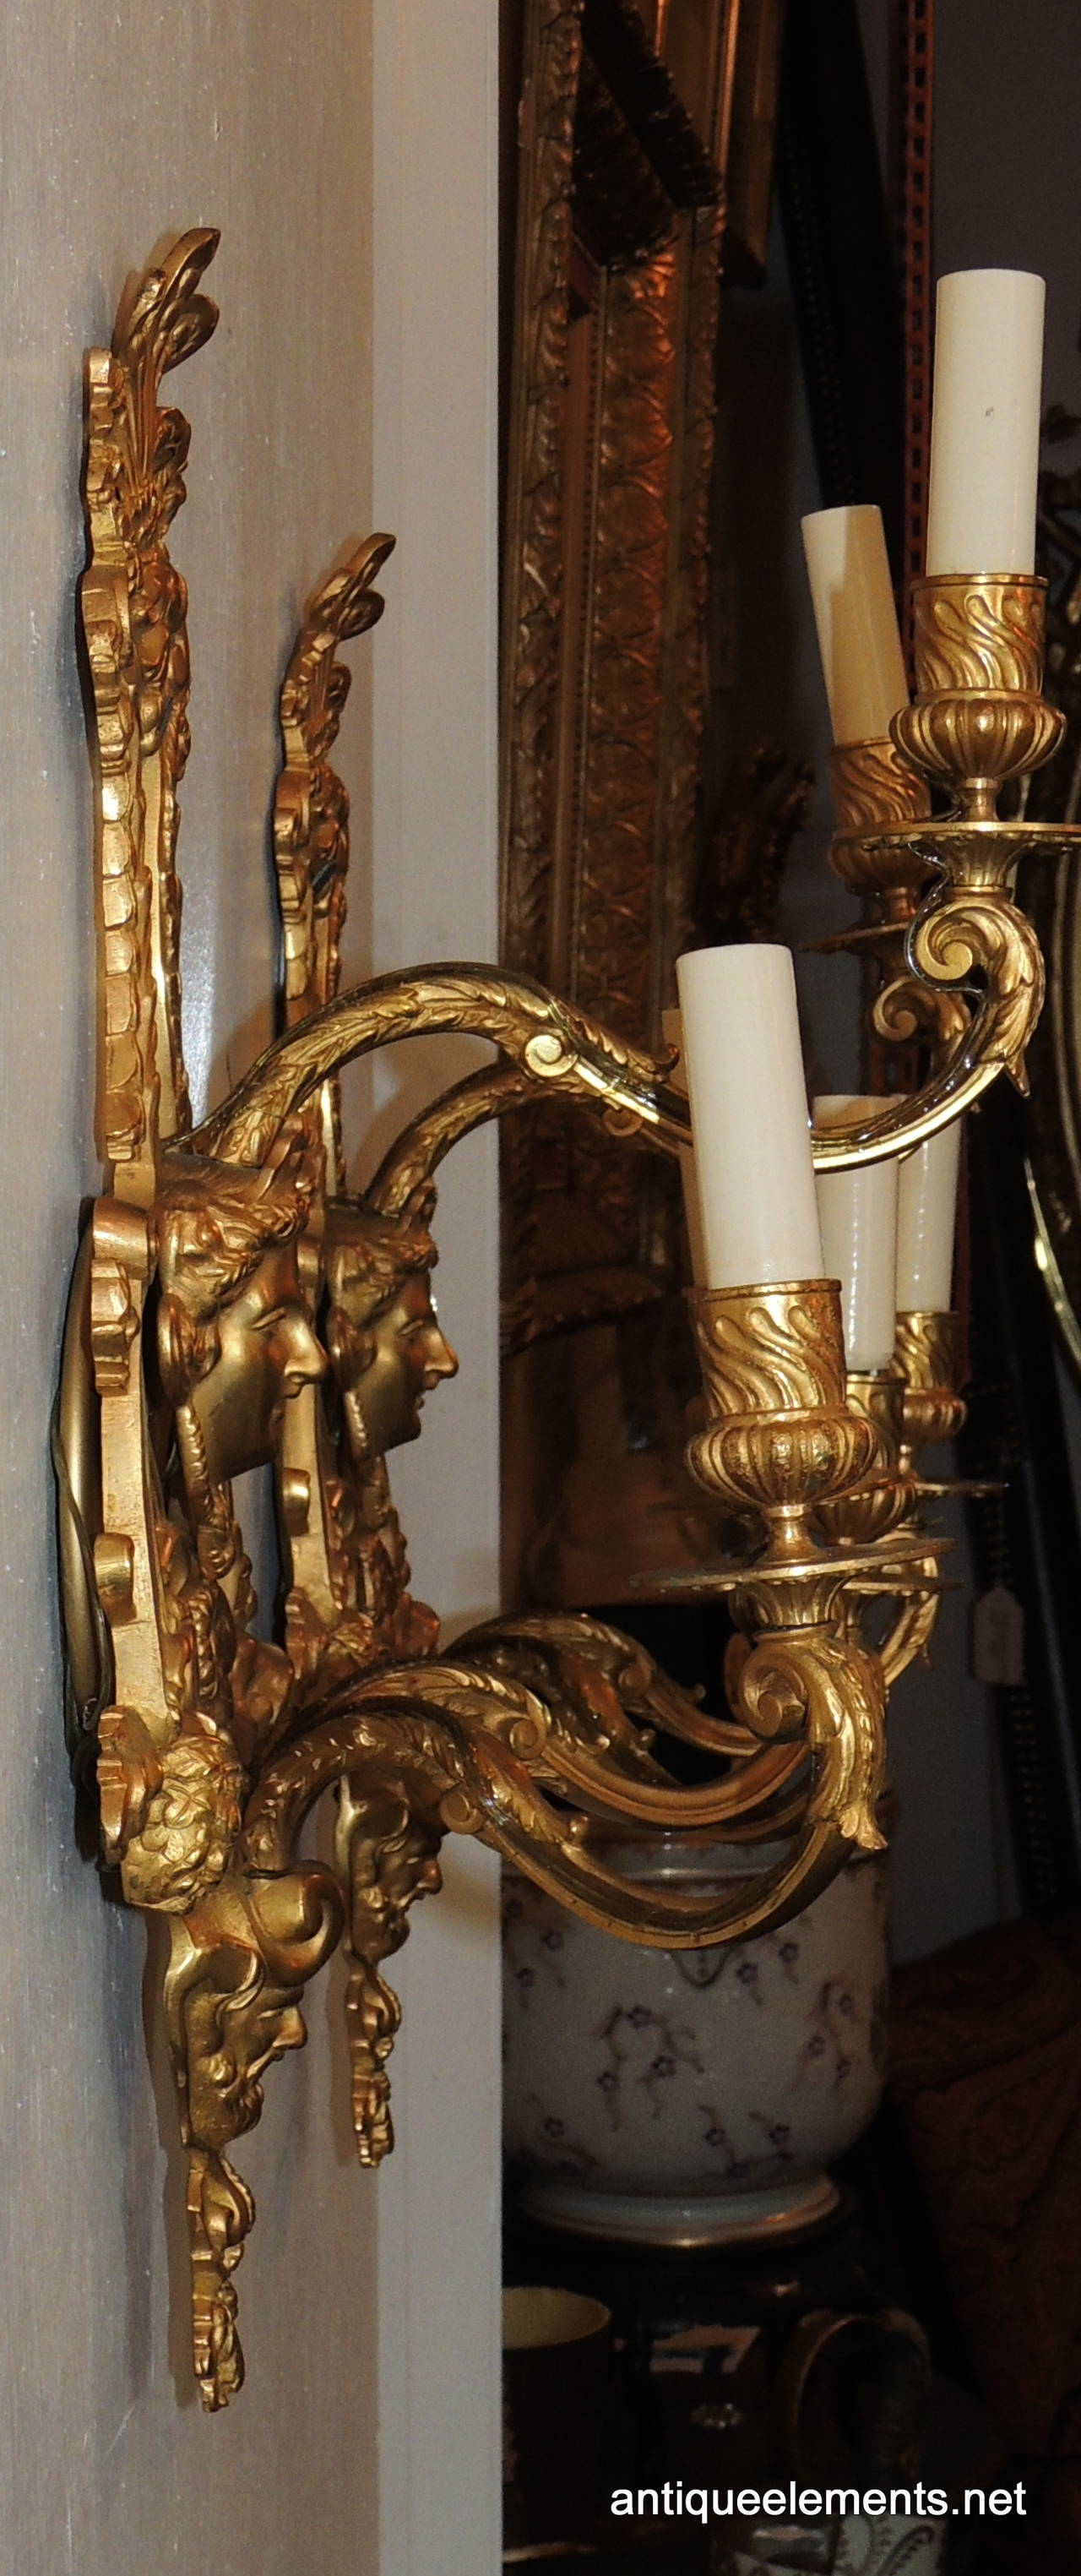 Early 20th Century Very Fine French Pair of Doré Bronze Three-Arm Figural Sconces